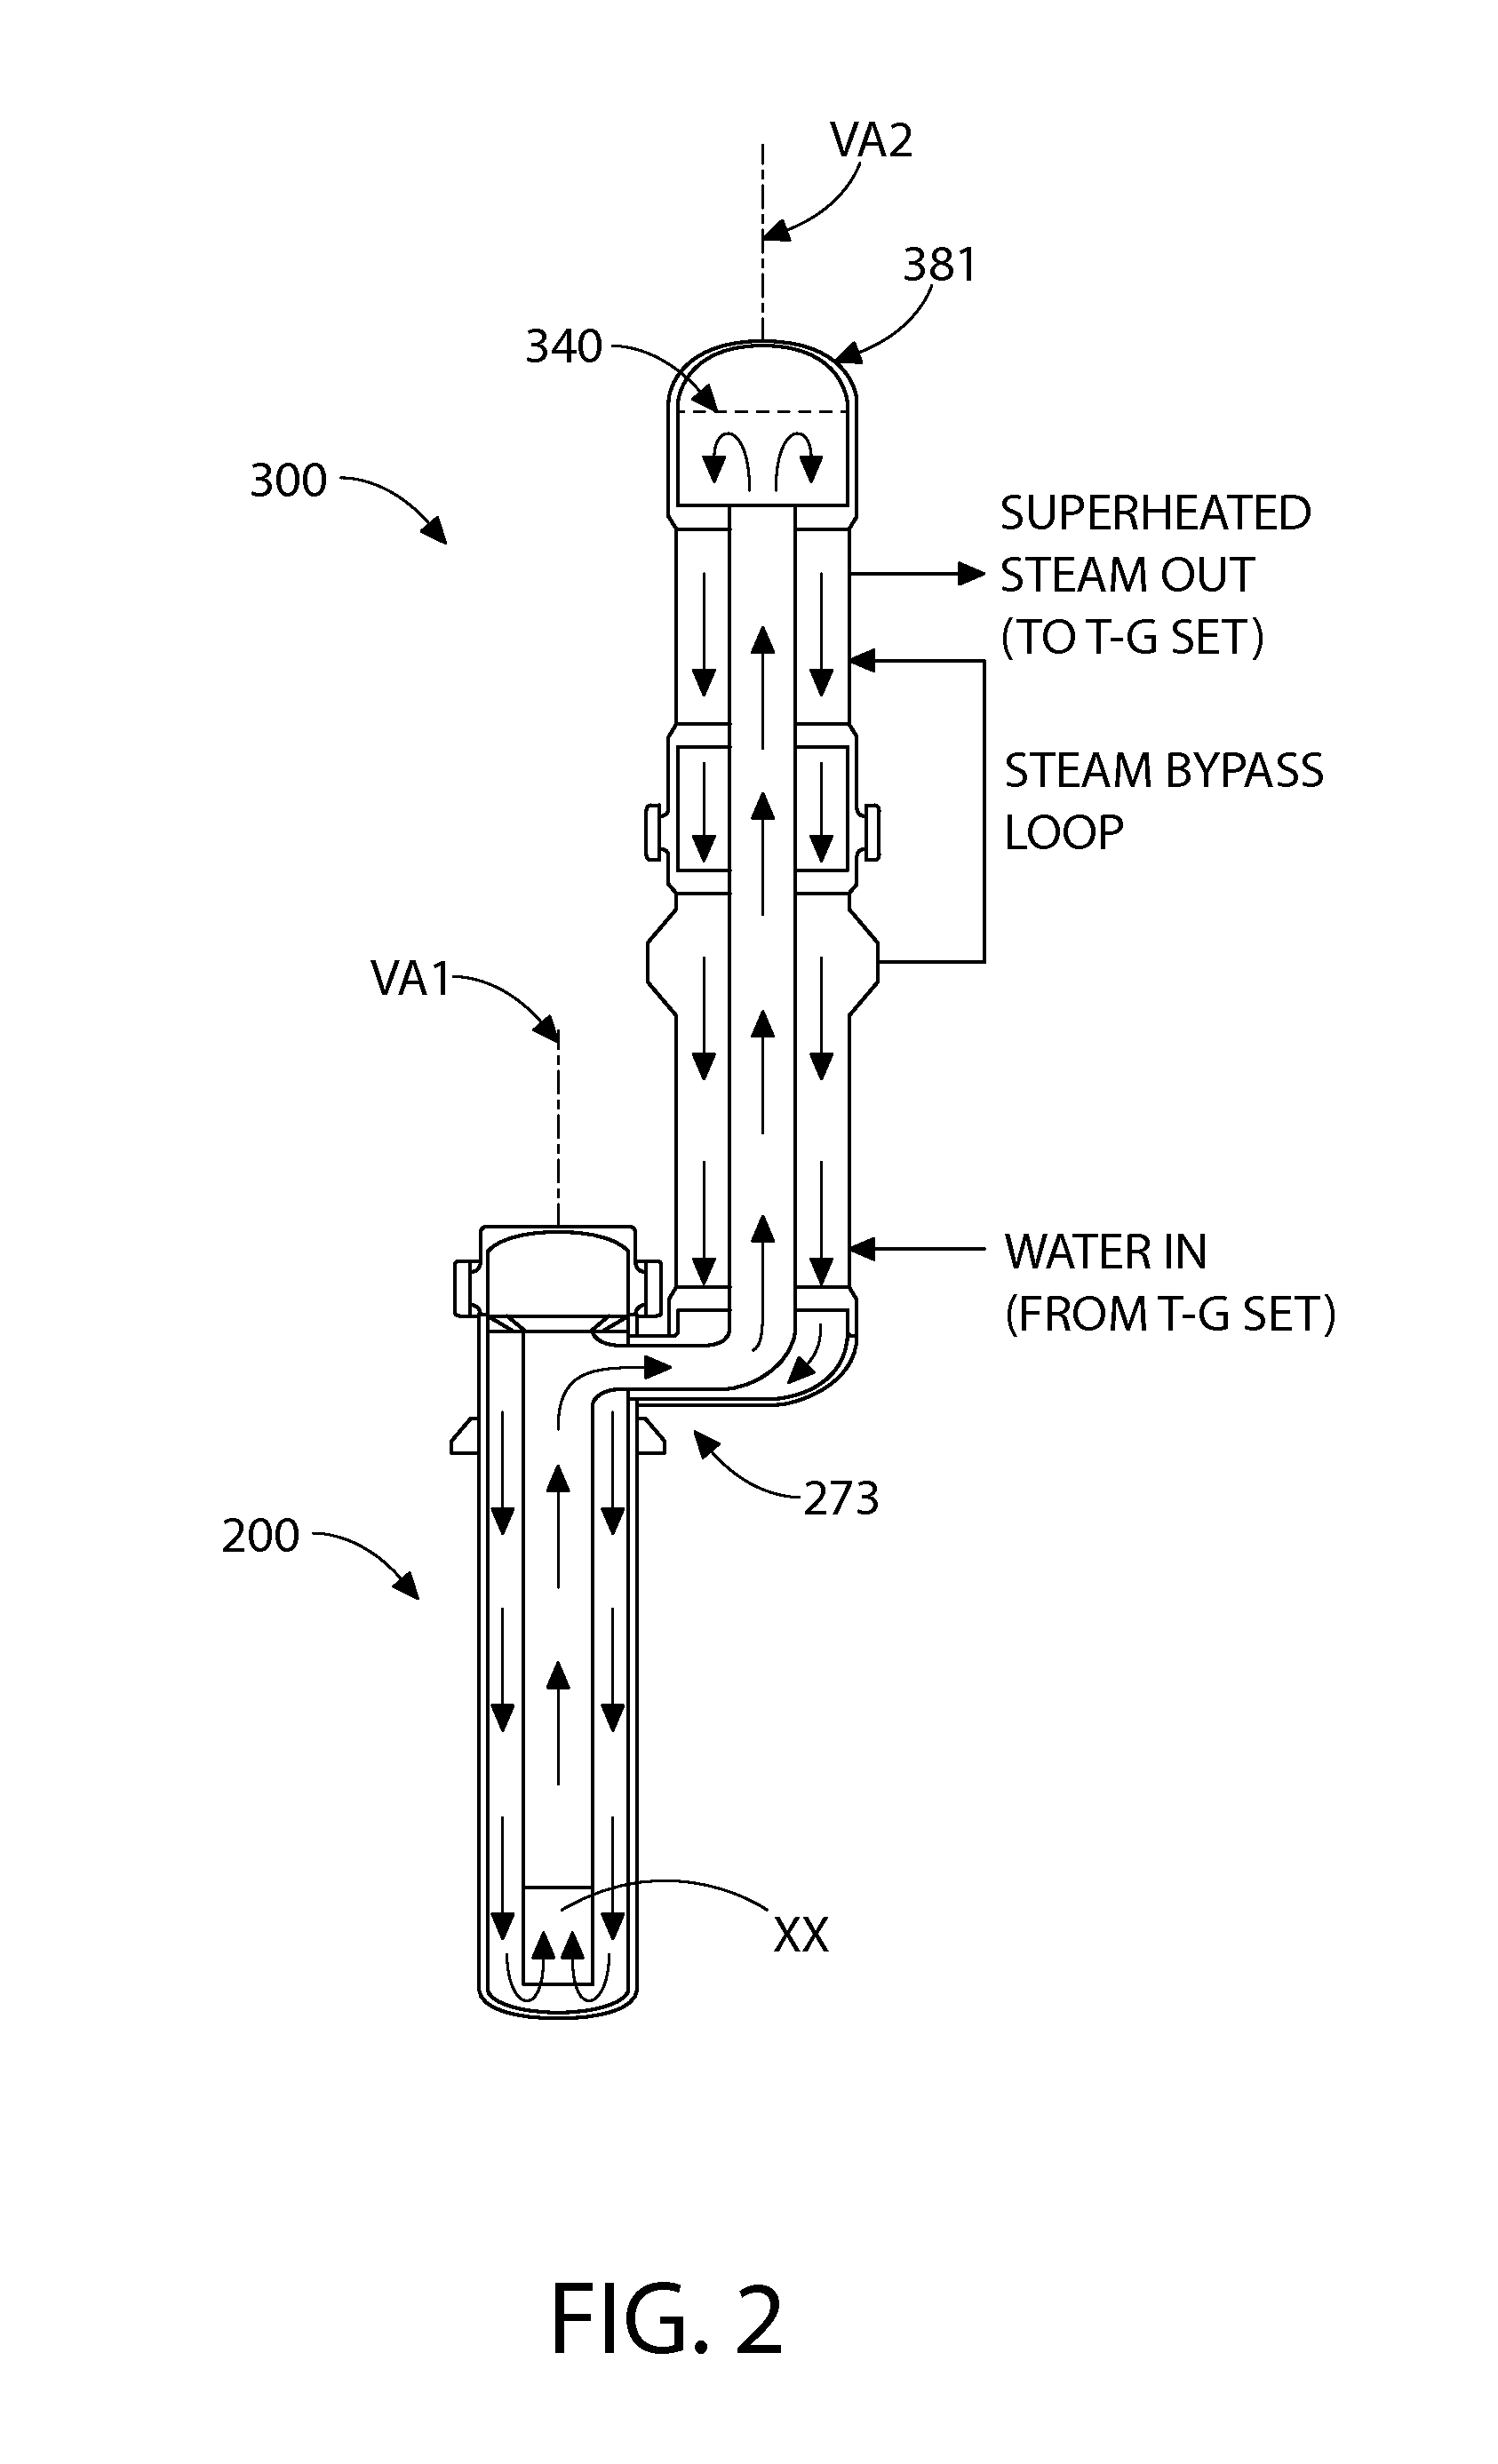 Nuclear steam supply system